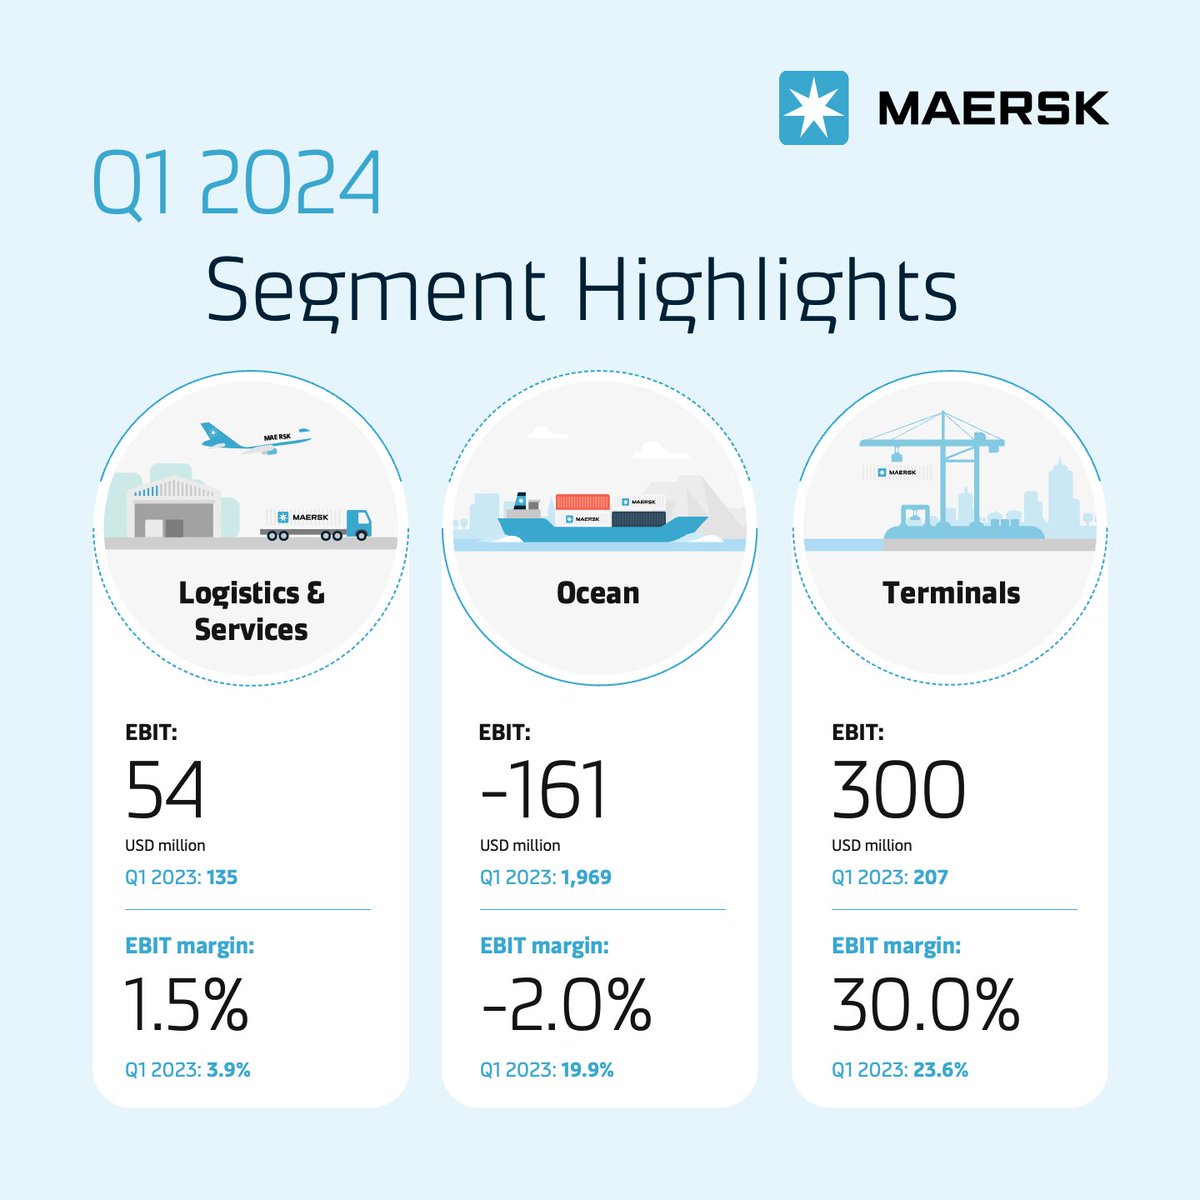 📢#Maersk delivered a Q1 in line with expectations showing a strong recovery in earnings compared to the Q4 of 2023, driven by good performance in our Terminals business and the combination of higher demand and a prolonged Red Sea crisis: maersk.com/news/articles/…

#Maerskresults